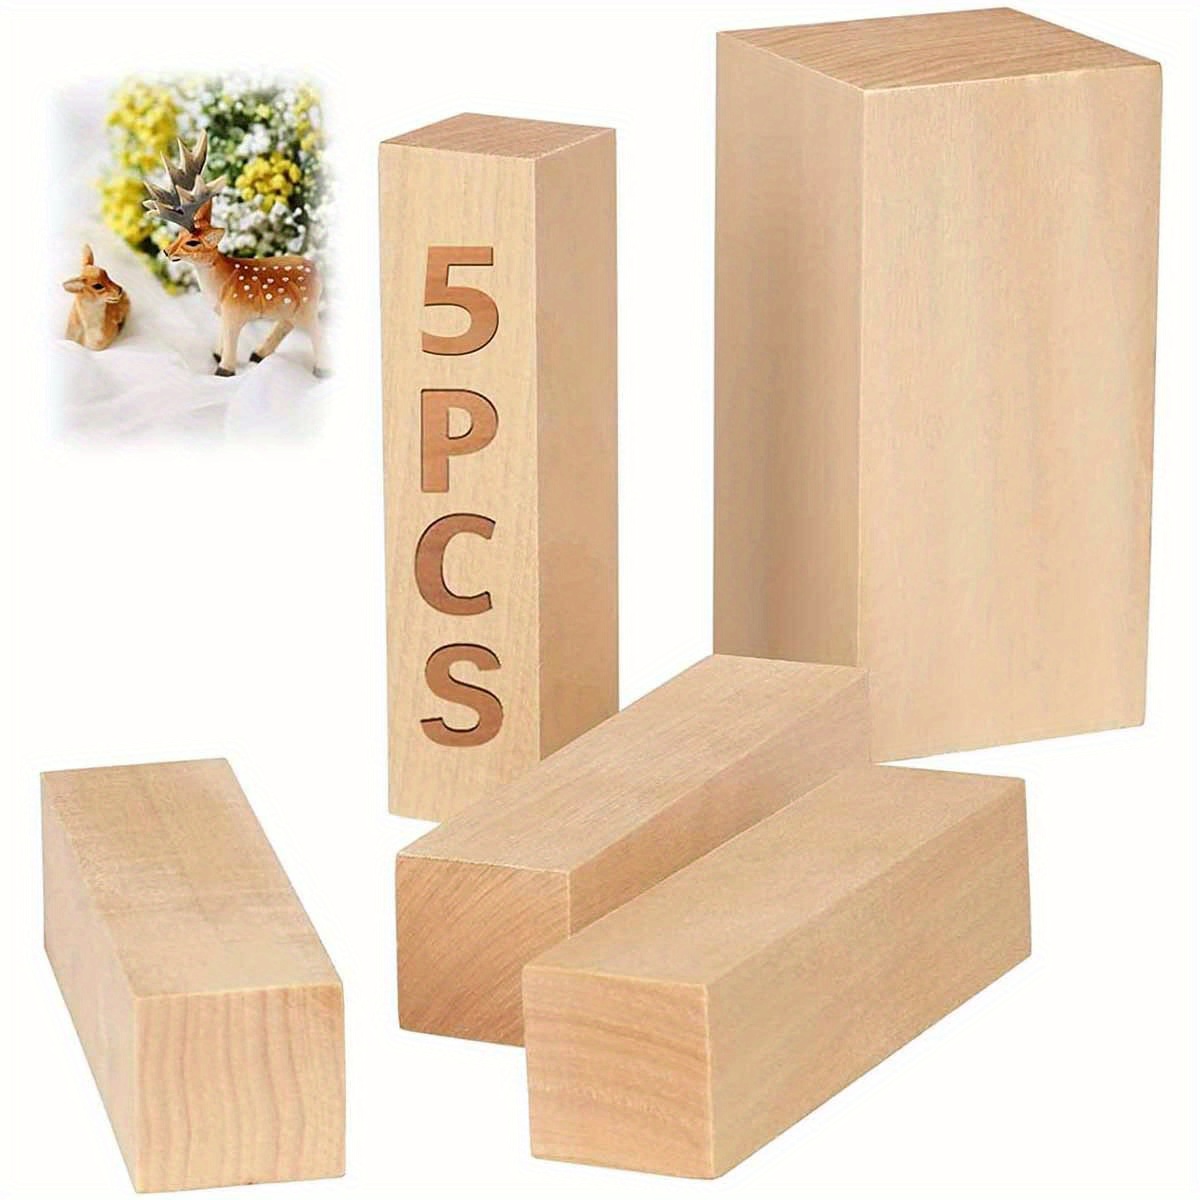 Lieonvis 12Pcs Basswood Carving Block Natural Soft Wood Carving Block 3  Sizes Portable Unfinished Wood Block Carving Whittling Art Supplies for  Beginner Expert DIY Wood Craft 